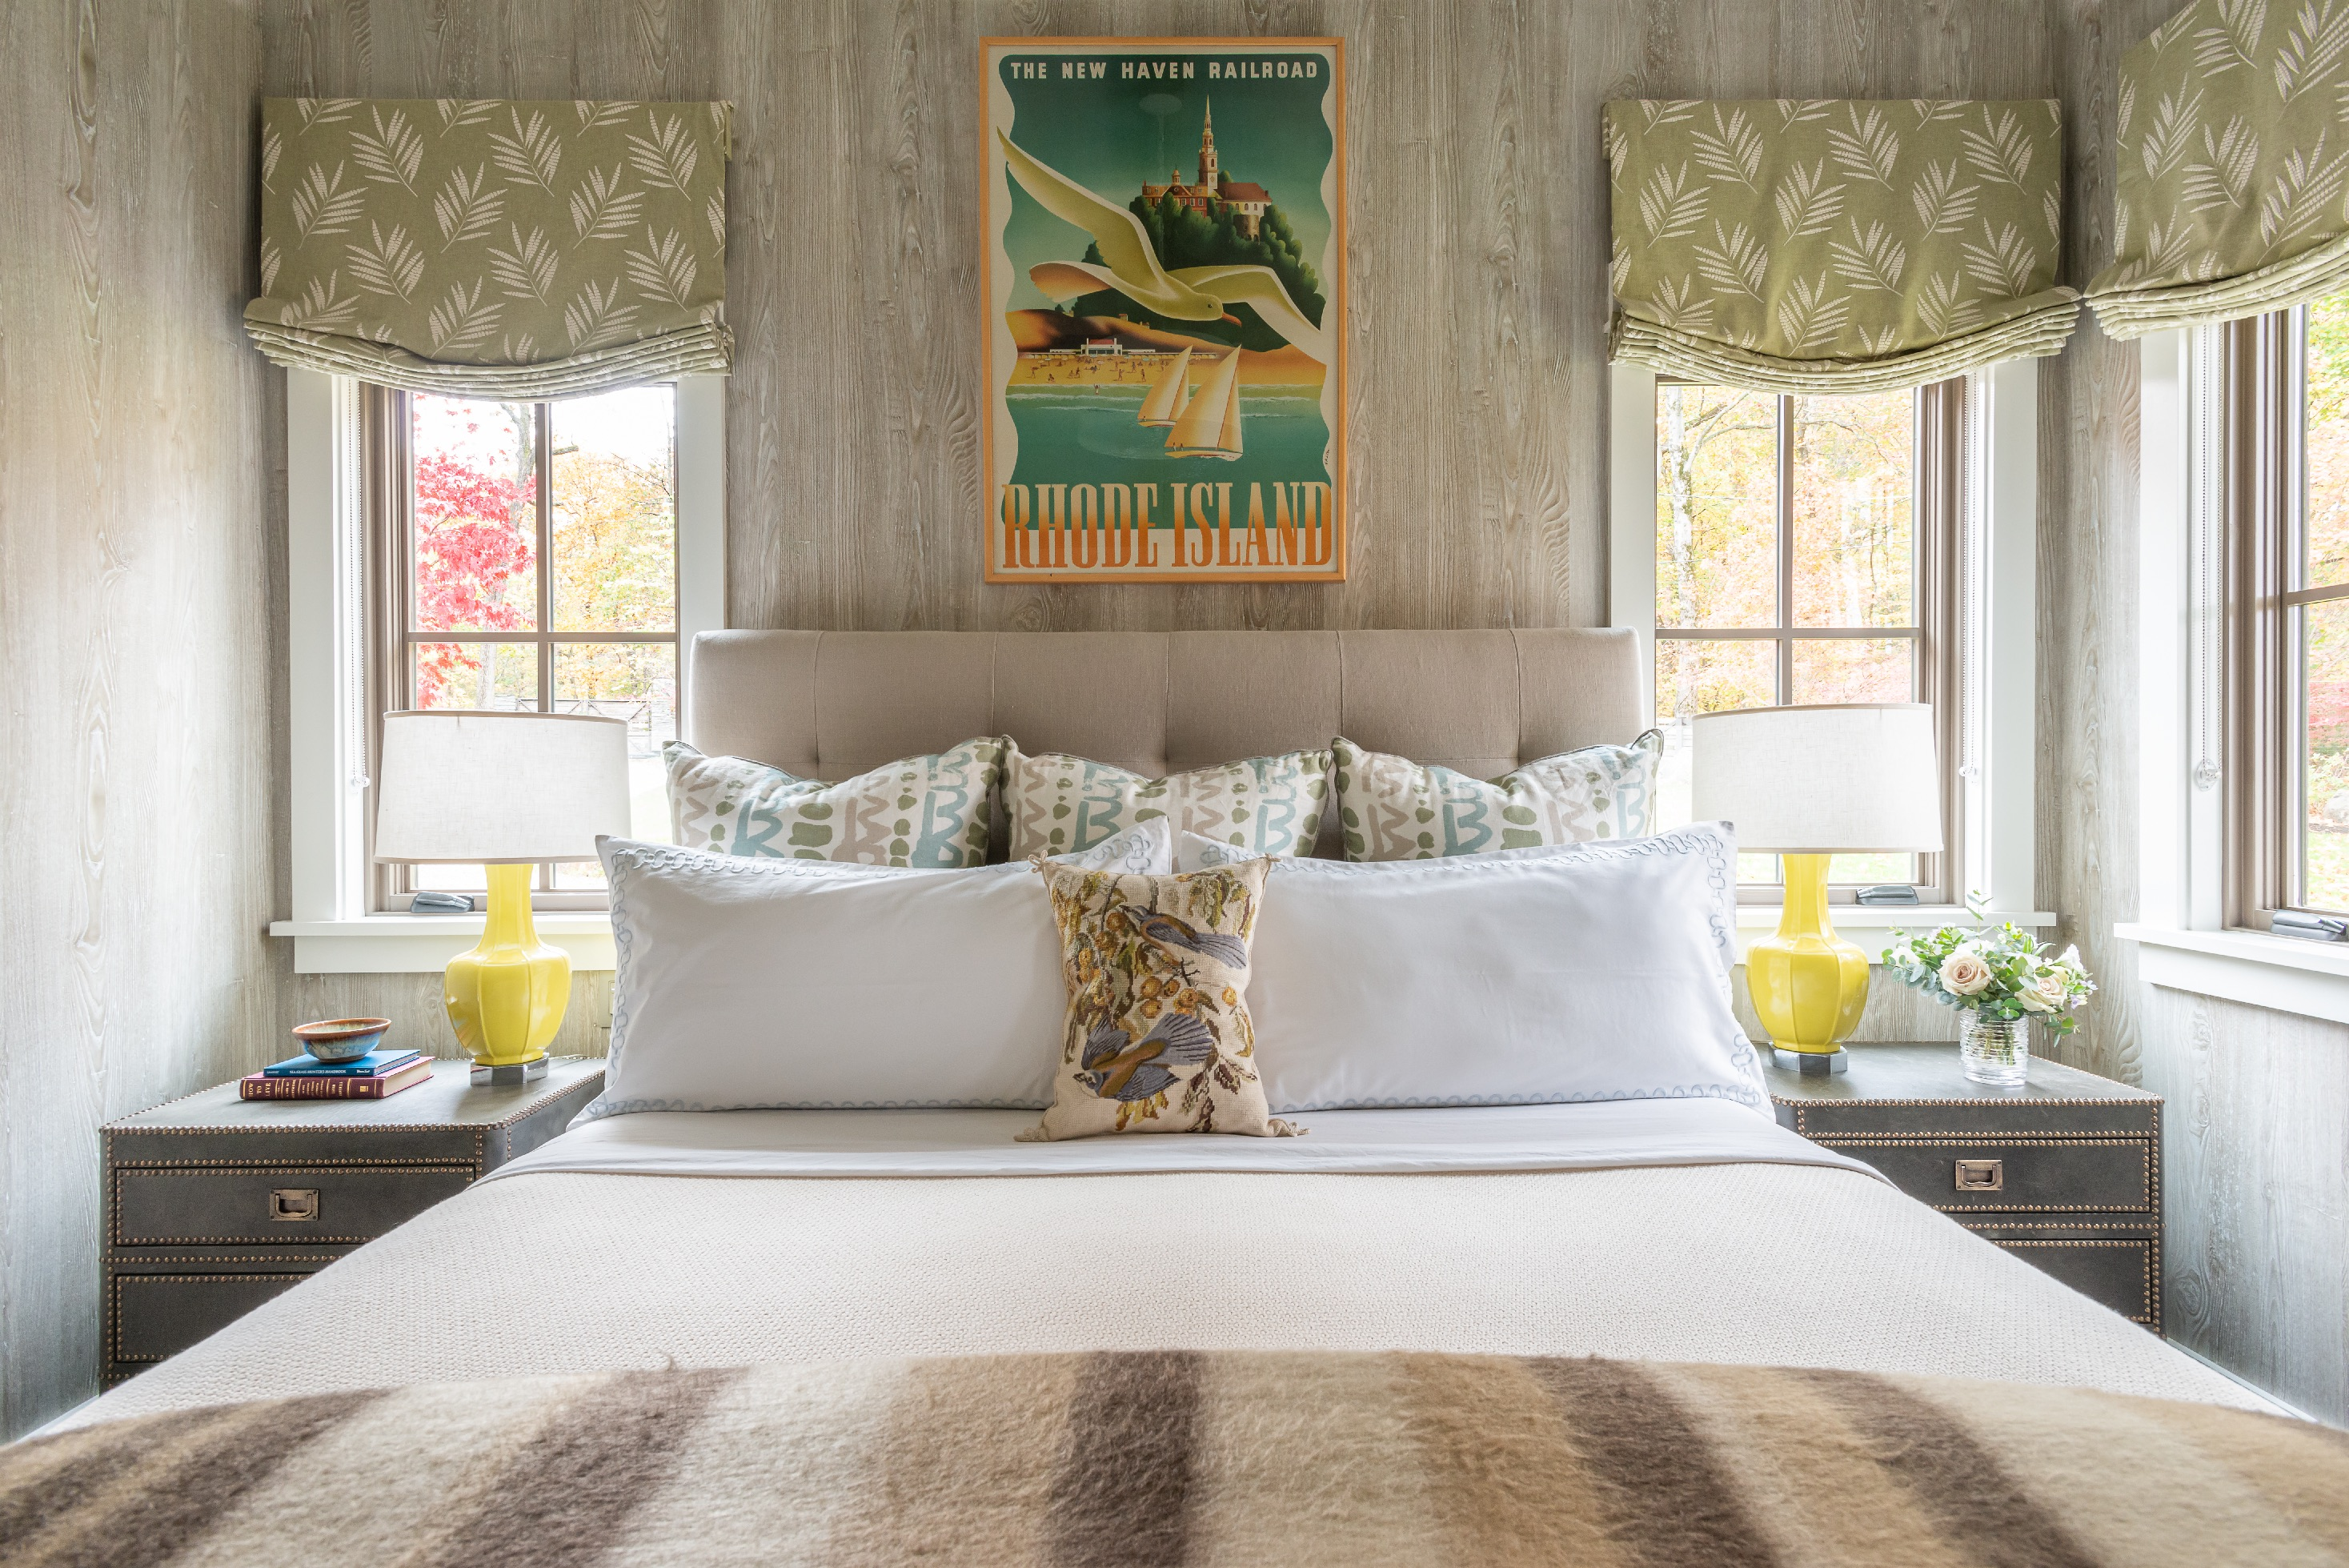  Transitional Vacation Home Bedroom. Snedens Landing Residence by Alan Tanksley, Inc..